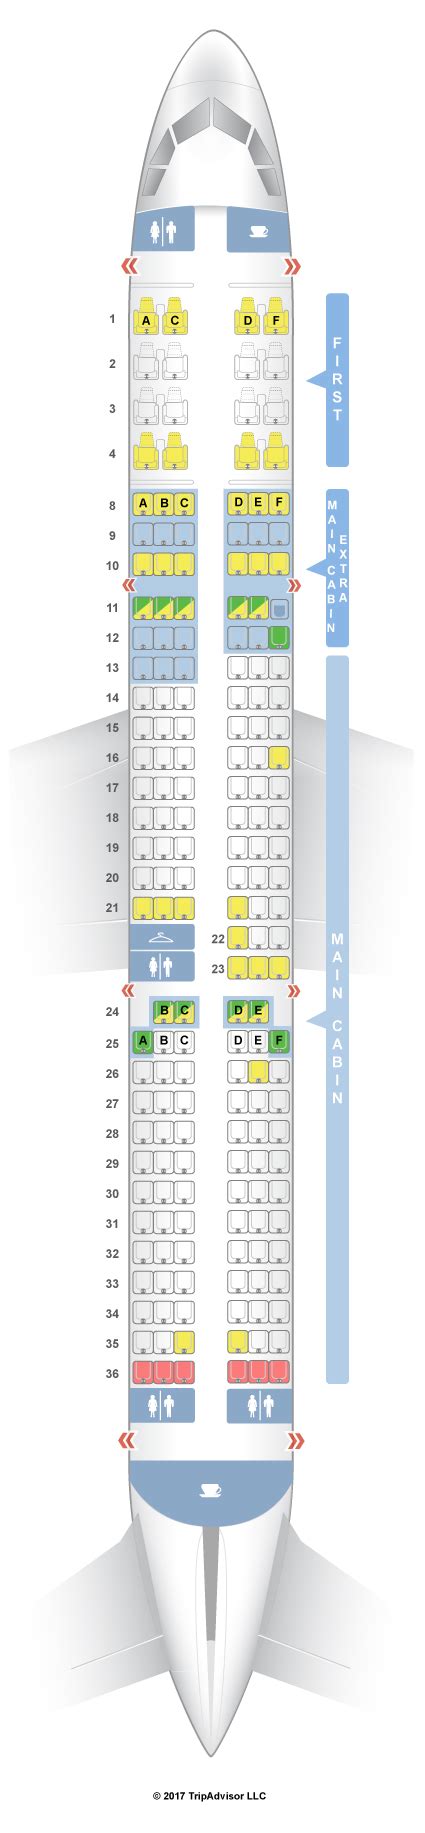 Airbus a321 seatguru. Seat Specs: Business: Pitch 34, Width 18. Economy: Pitch 31, Width 18. Guru Tips. The SWISS A321-111 has 219 seats. The standard SWISS cabin layout is 54 Business Class and 183 Economy Class seats. Note that Business Class seating is the standard Euro Business 3-3 arrangement with the middle seat blocked for additional personal space (yielding ... 